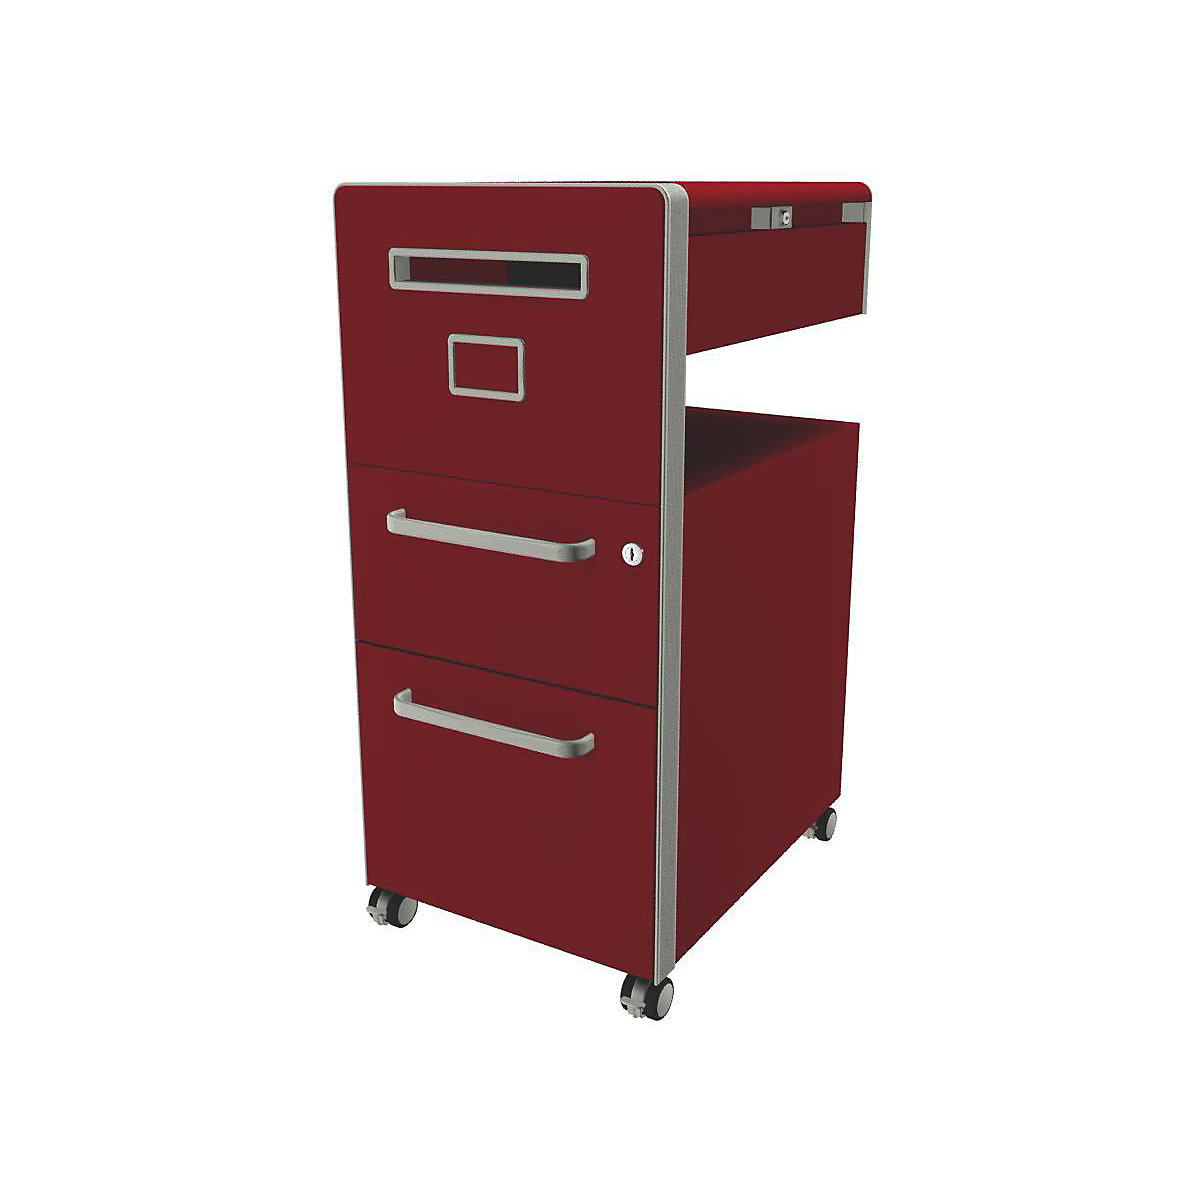 Bite™ pedestal furniture, with 1 pin board, opens on the left side – BISLEY, with 1 universal drawer, 1 suspension file drawer, cardinal red-14